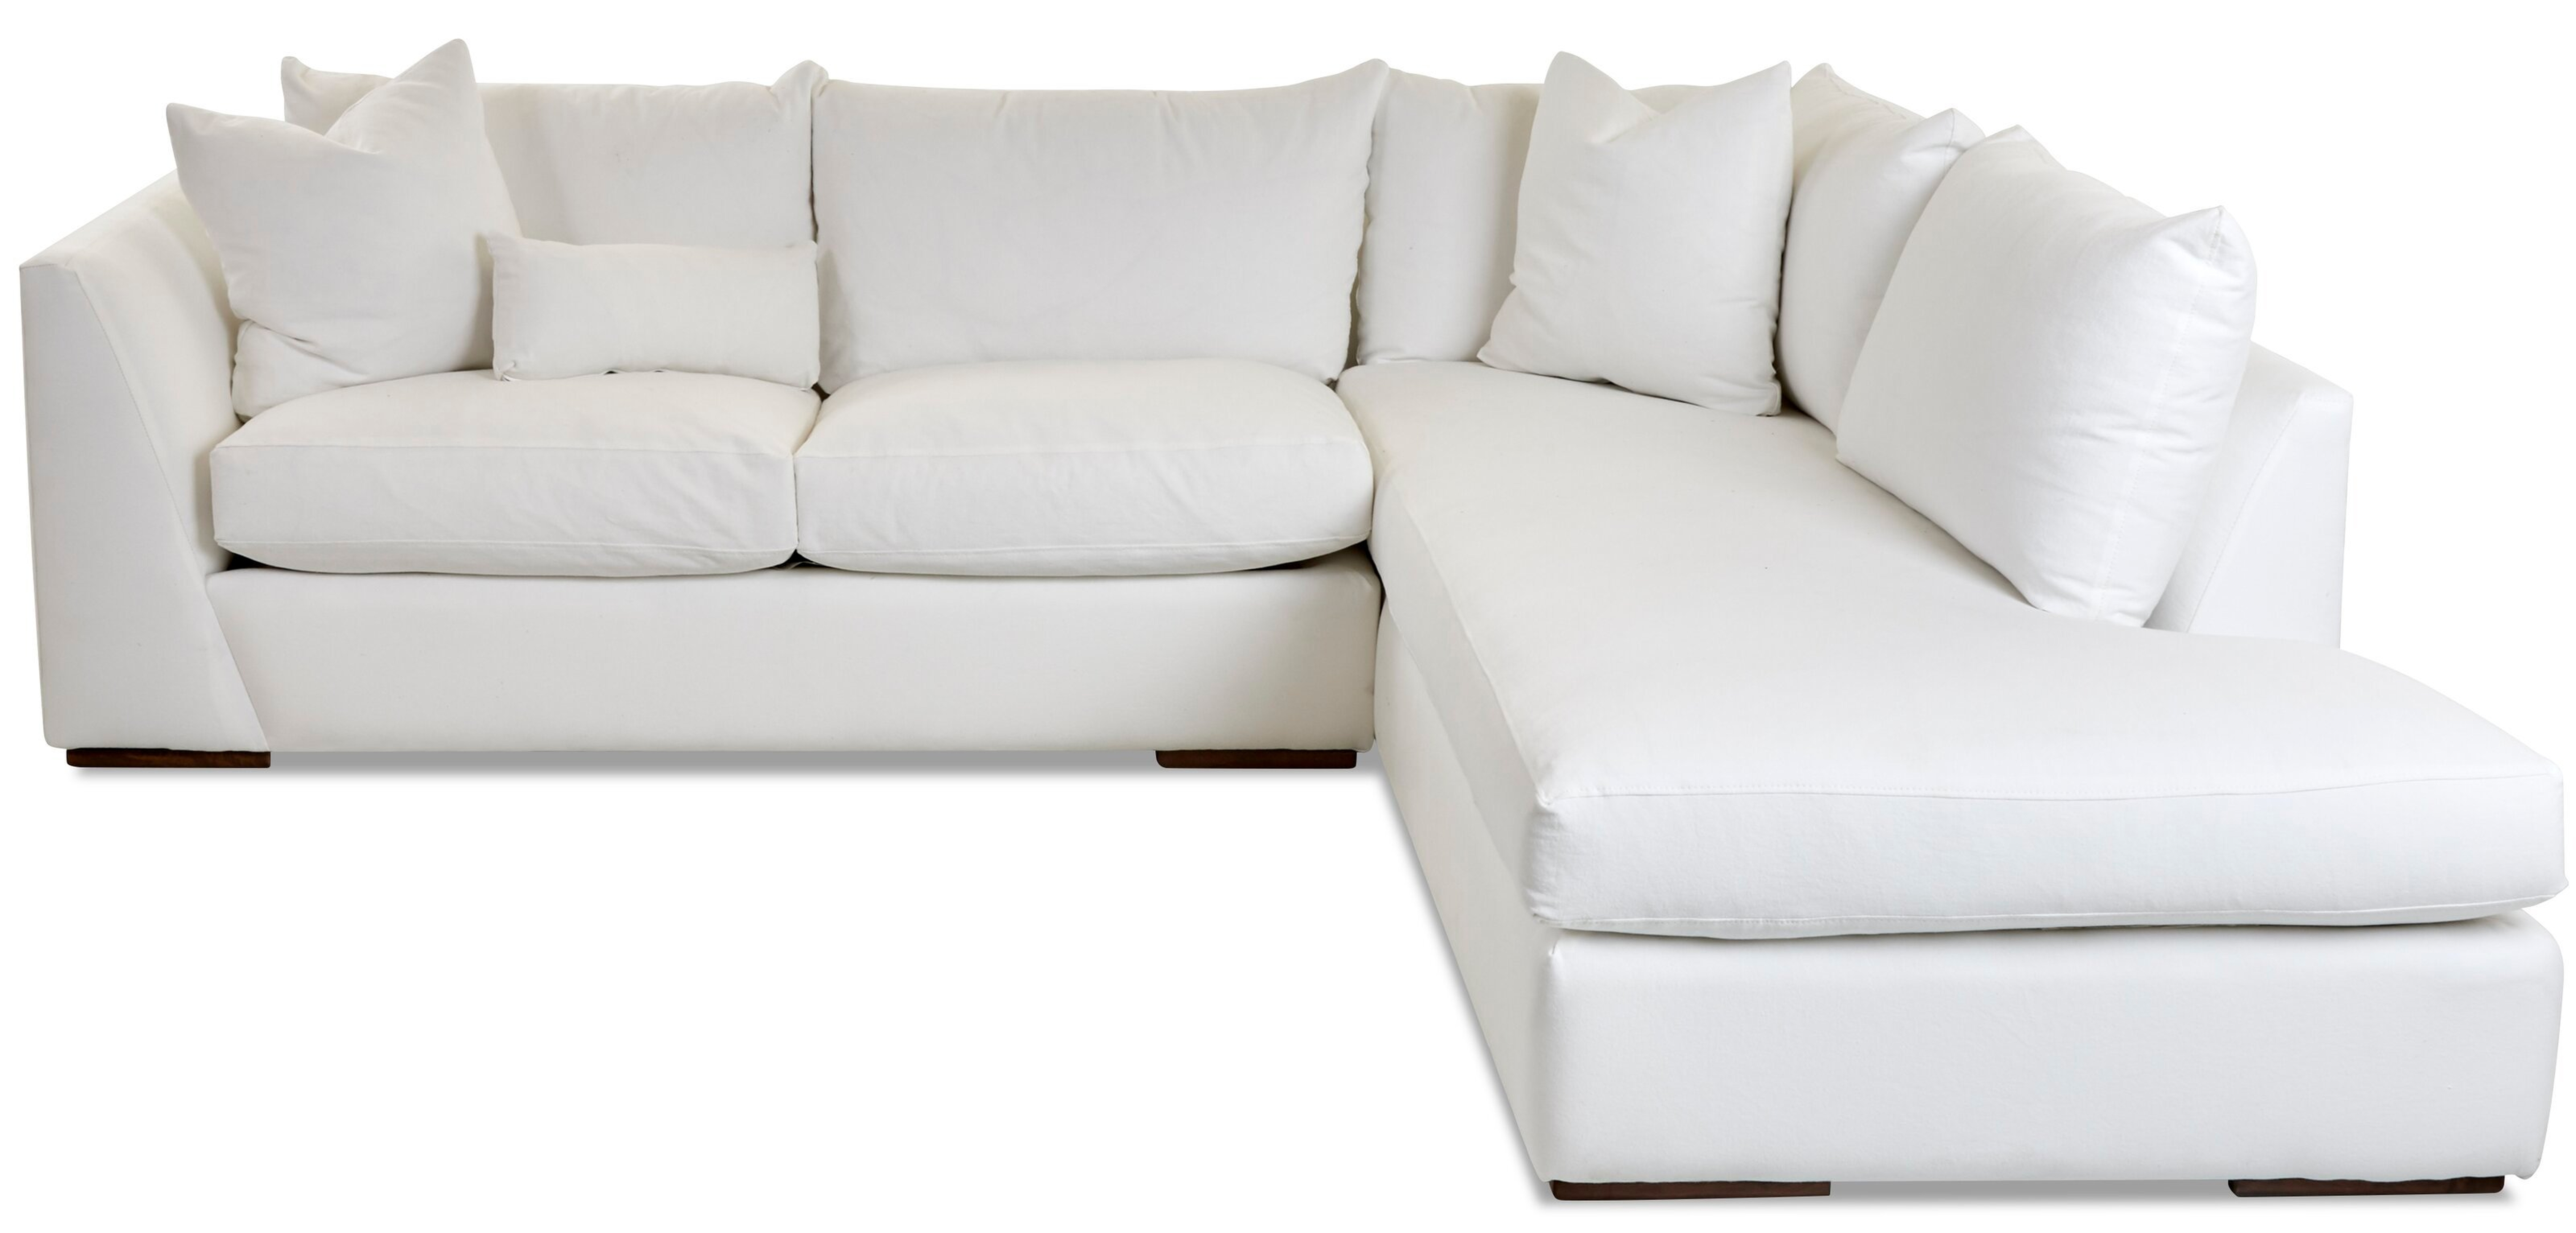 Alisa 115" Sectional Collection/Right Hand Facing (fabric color shown on swatch) - Birch Lane